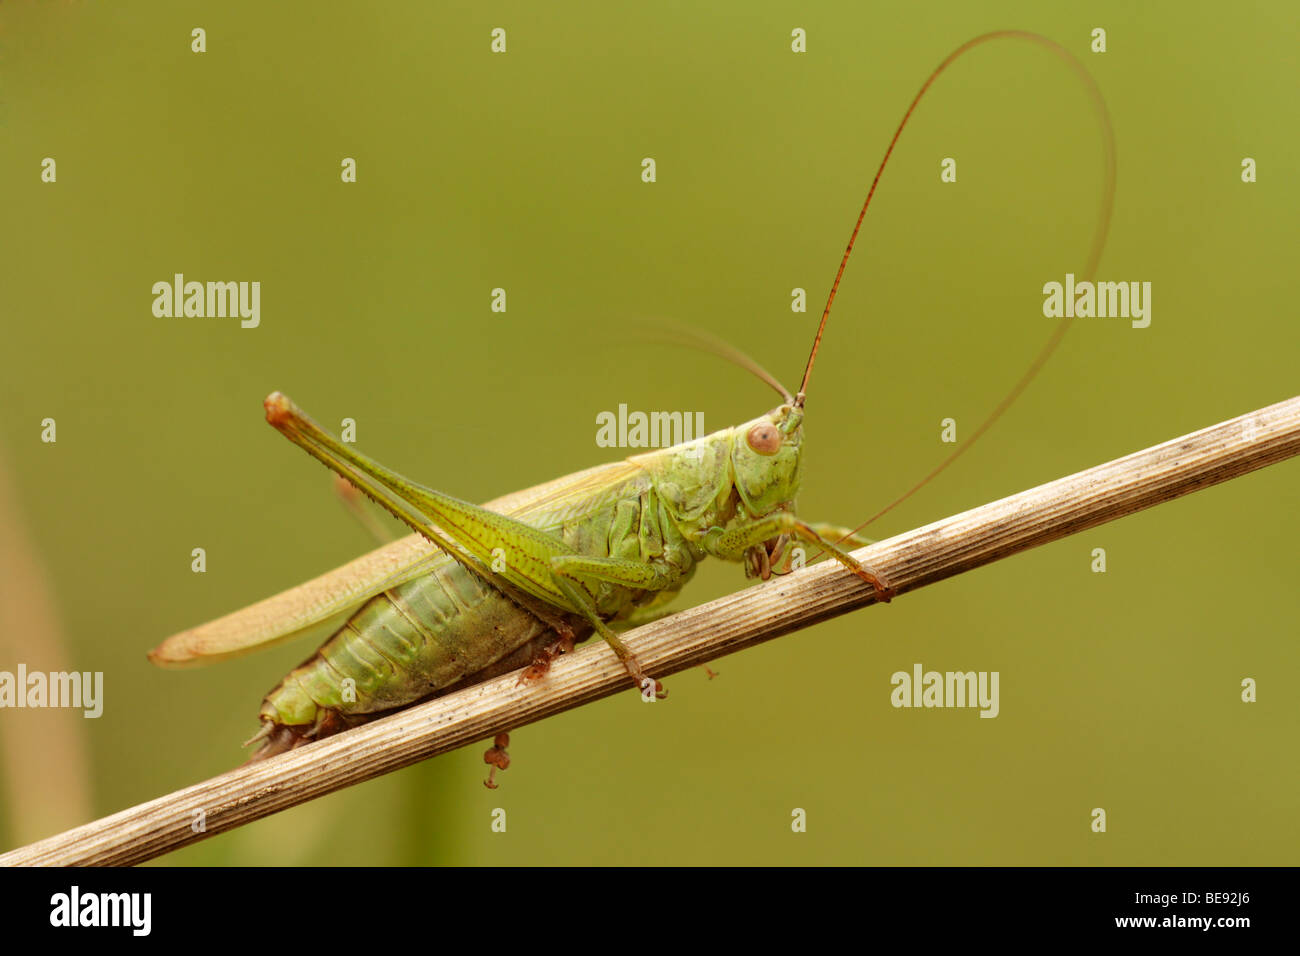 Long-winged conehead grasshopper (Conocephalus discolor), male, cleaning its antennae Stock Photo